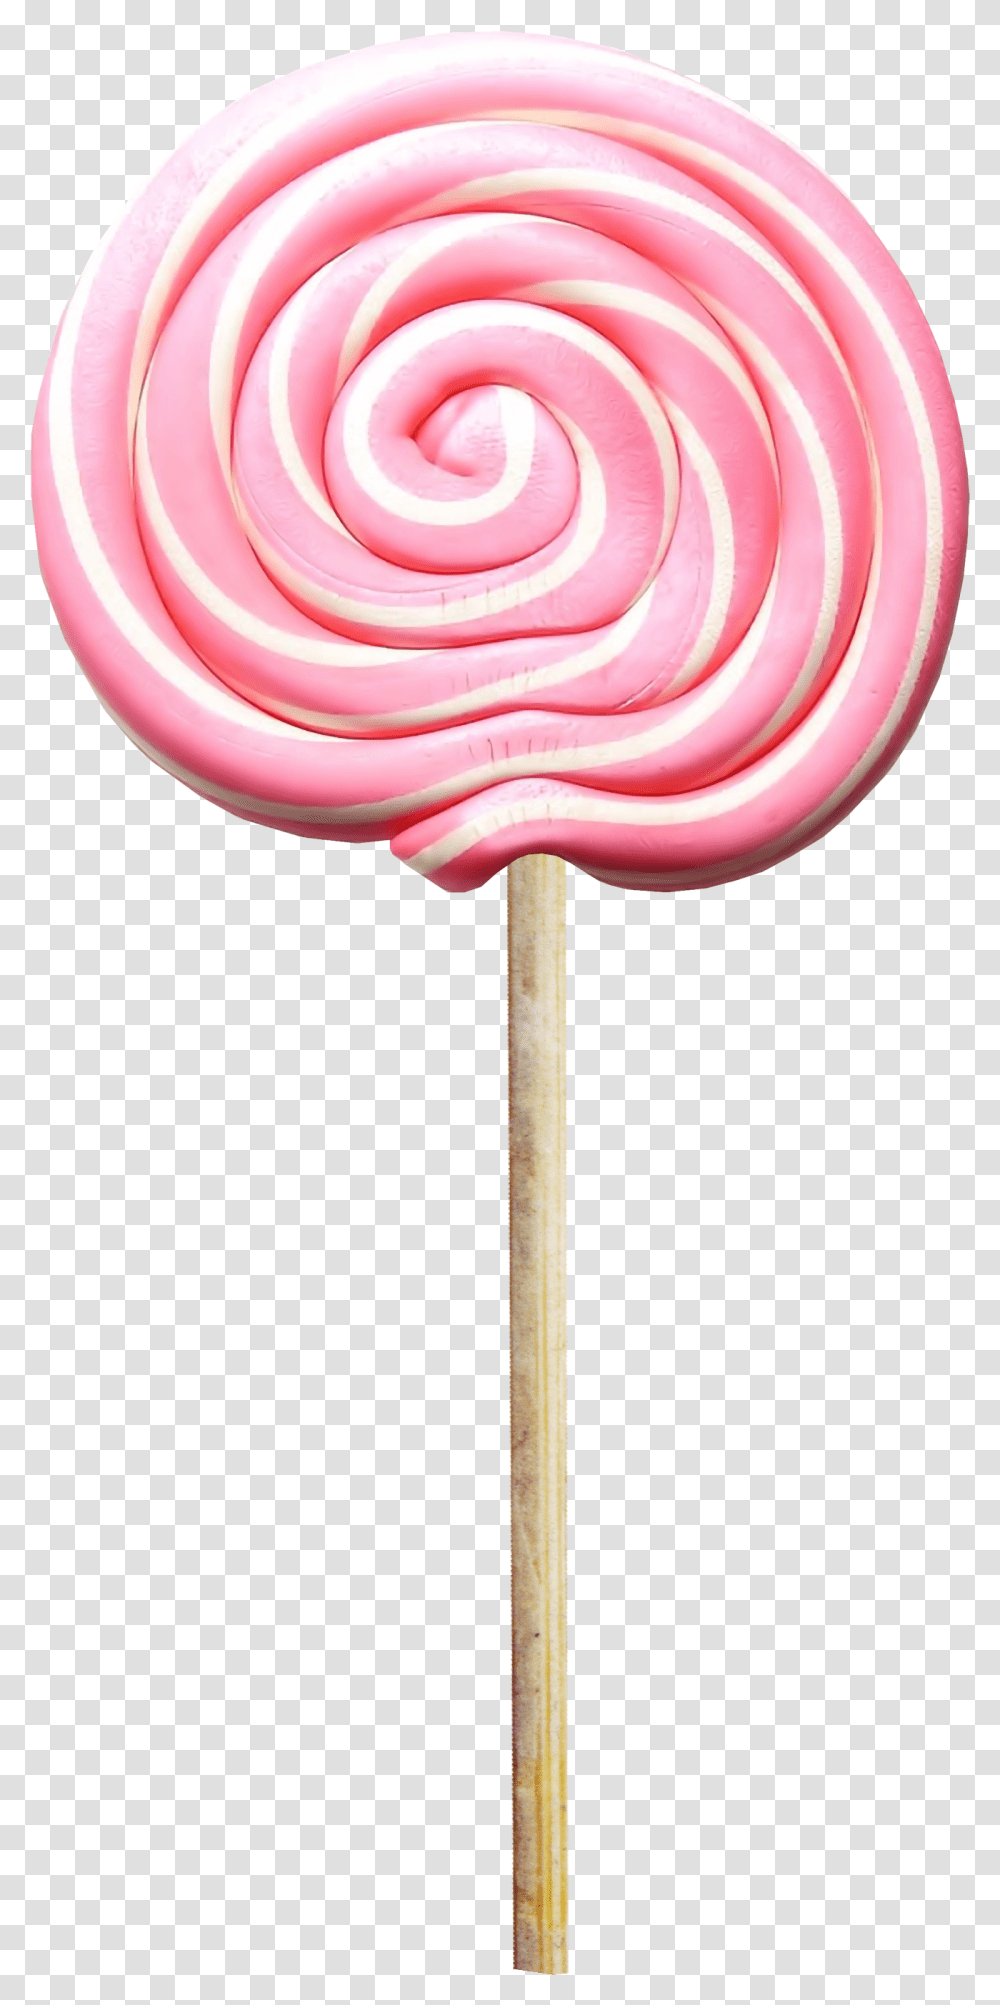 Download Hd Lollipop Pink Lollipop Pink, Candy, Food, Sweets, Confectionery Transparent Png